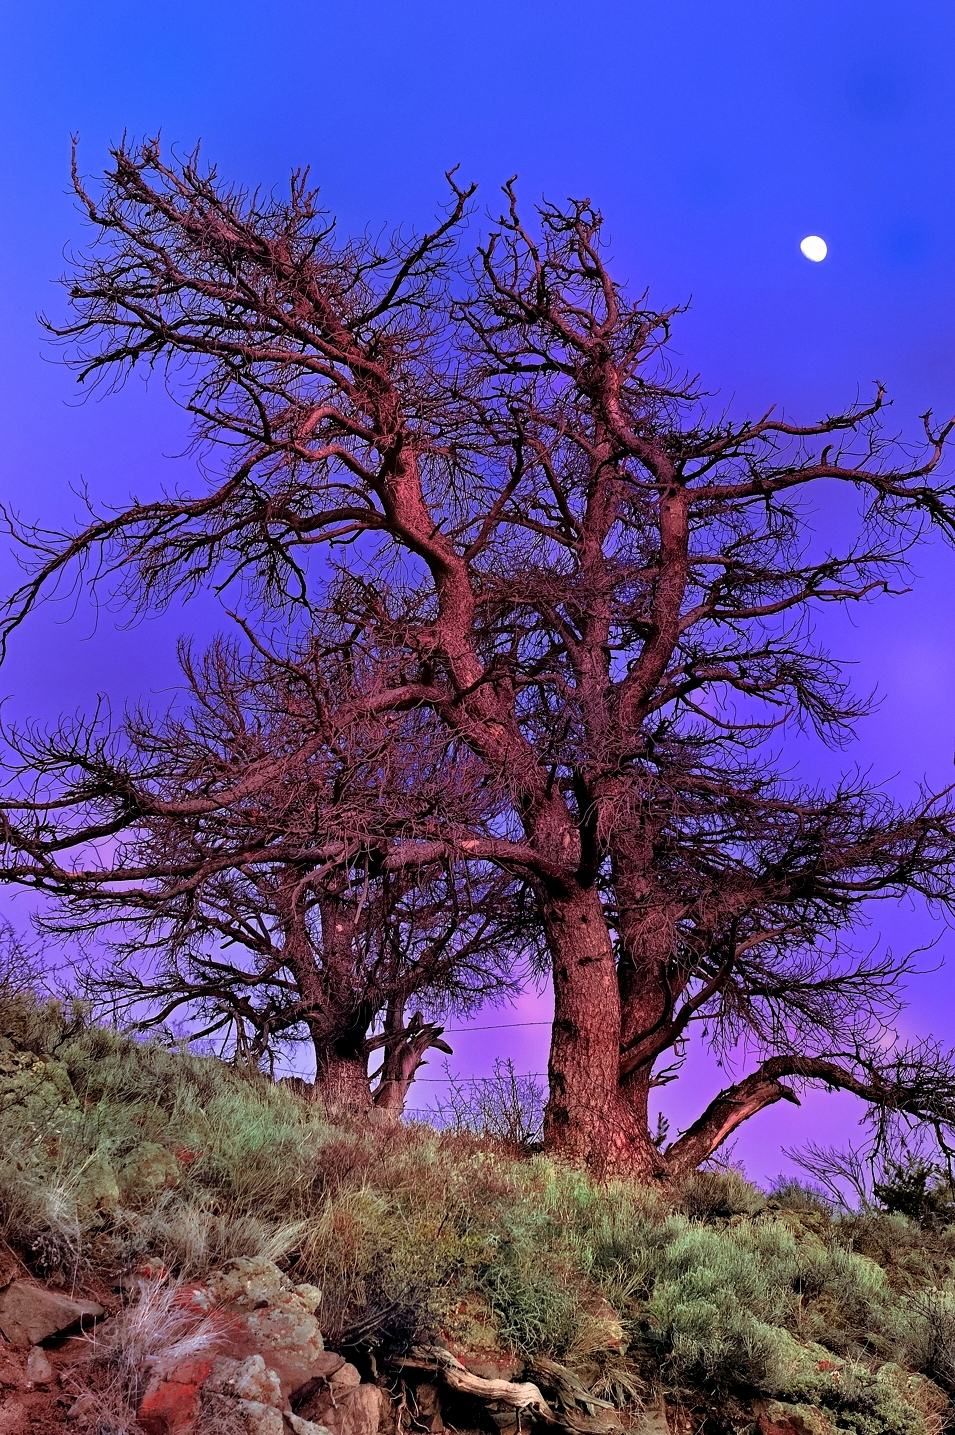 Magical Moonlight Over Lost Rocky Mountain Pine